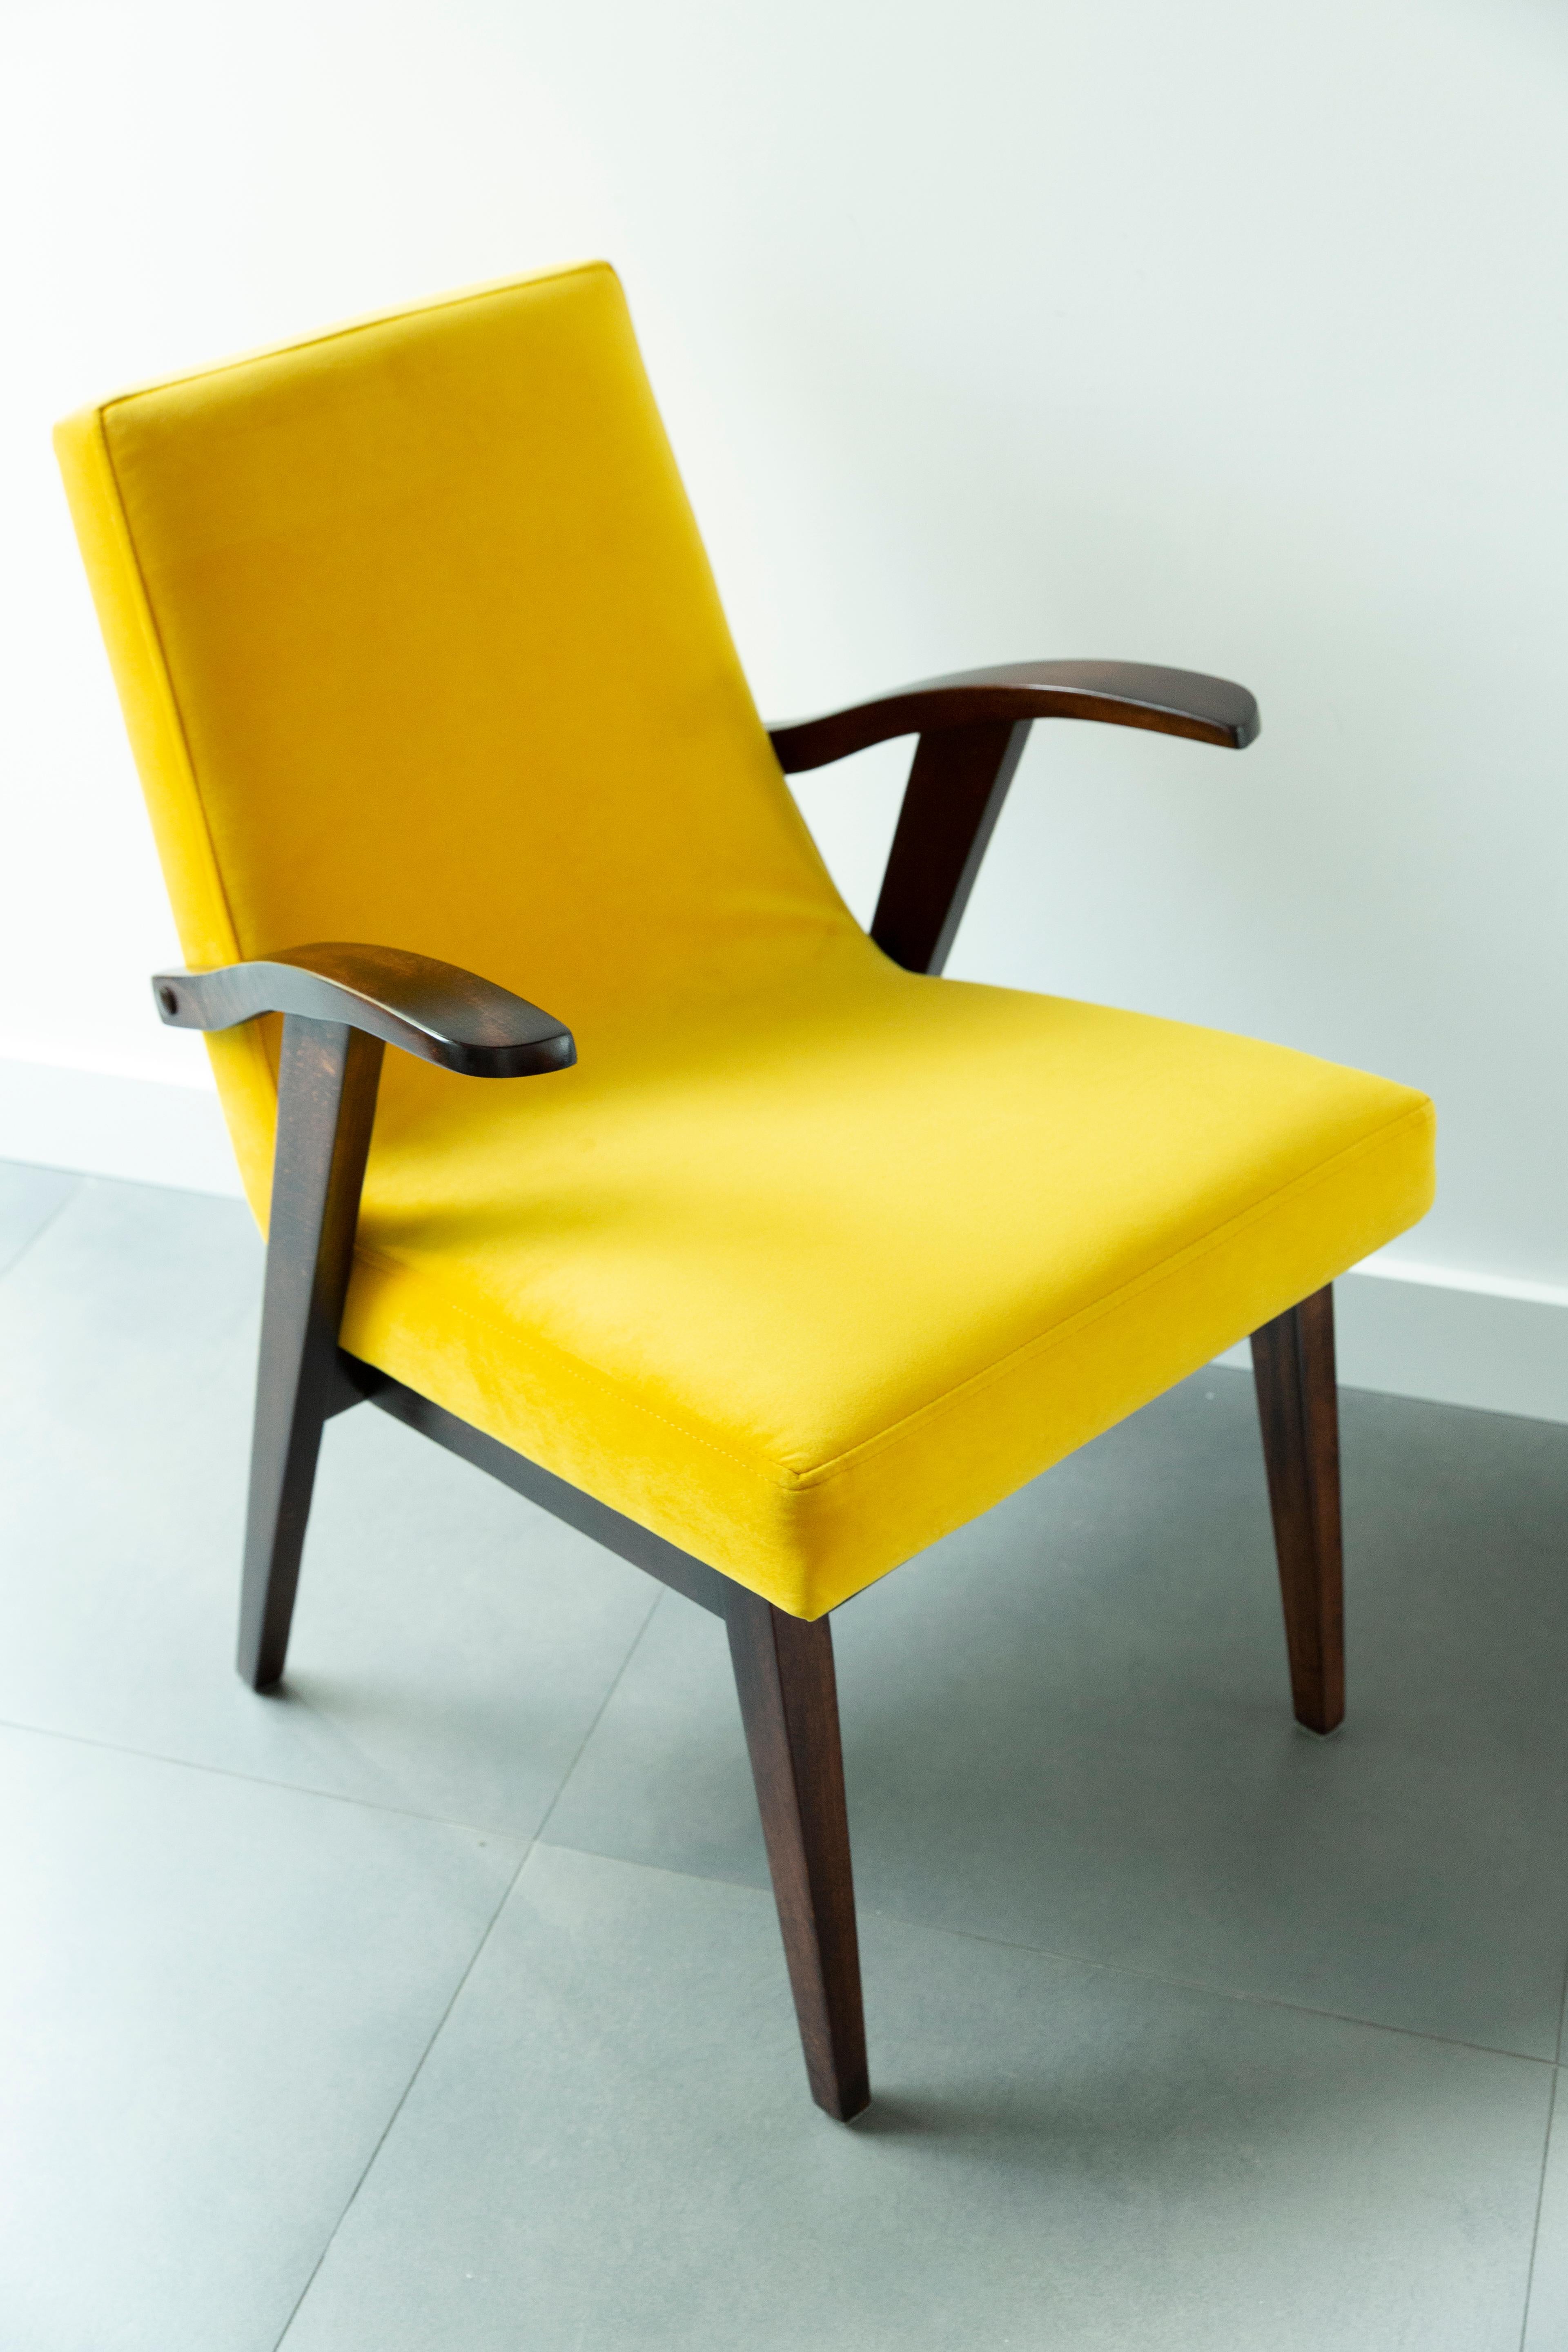 Polish Set of Eight Vintage Chairs in Yellow Velvet by Mieczyslaw Puchala, 1960s For Sale